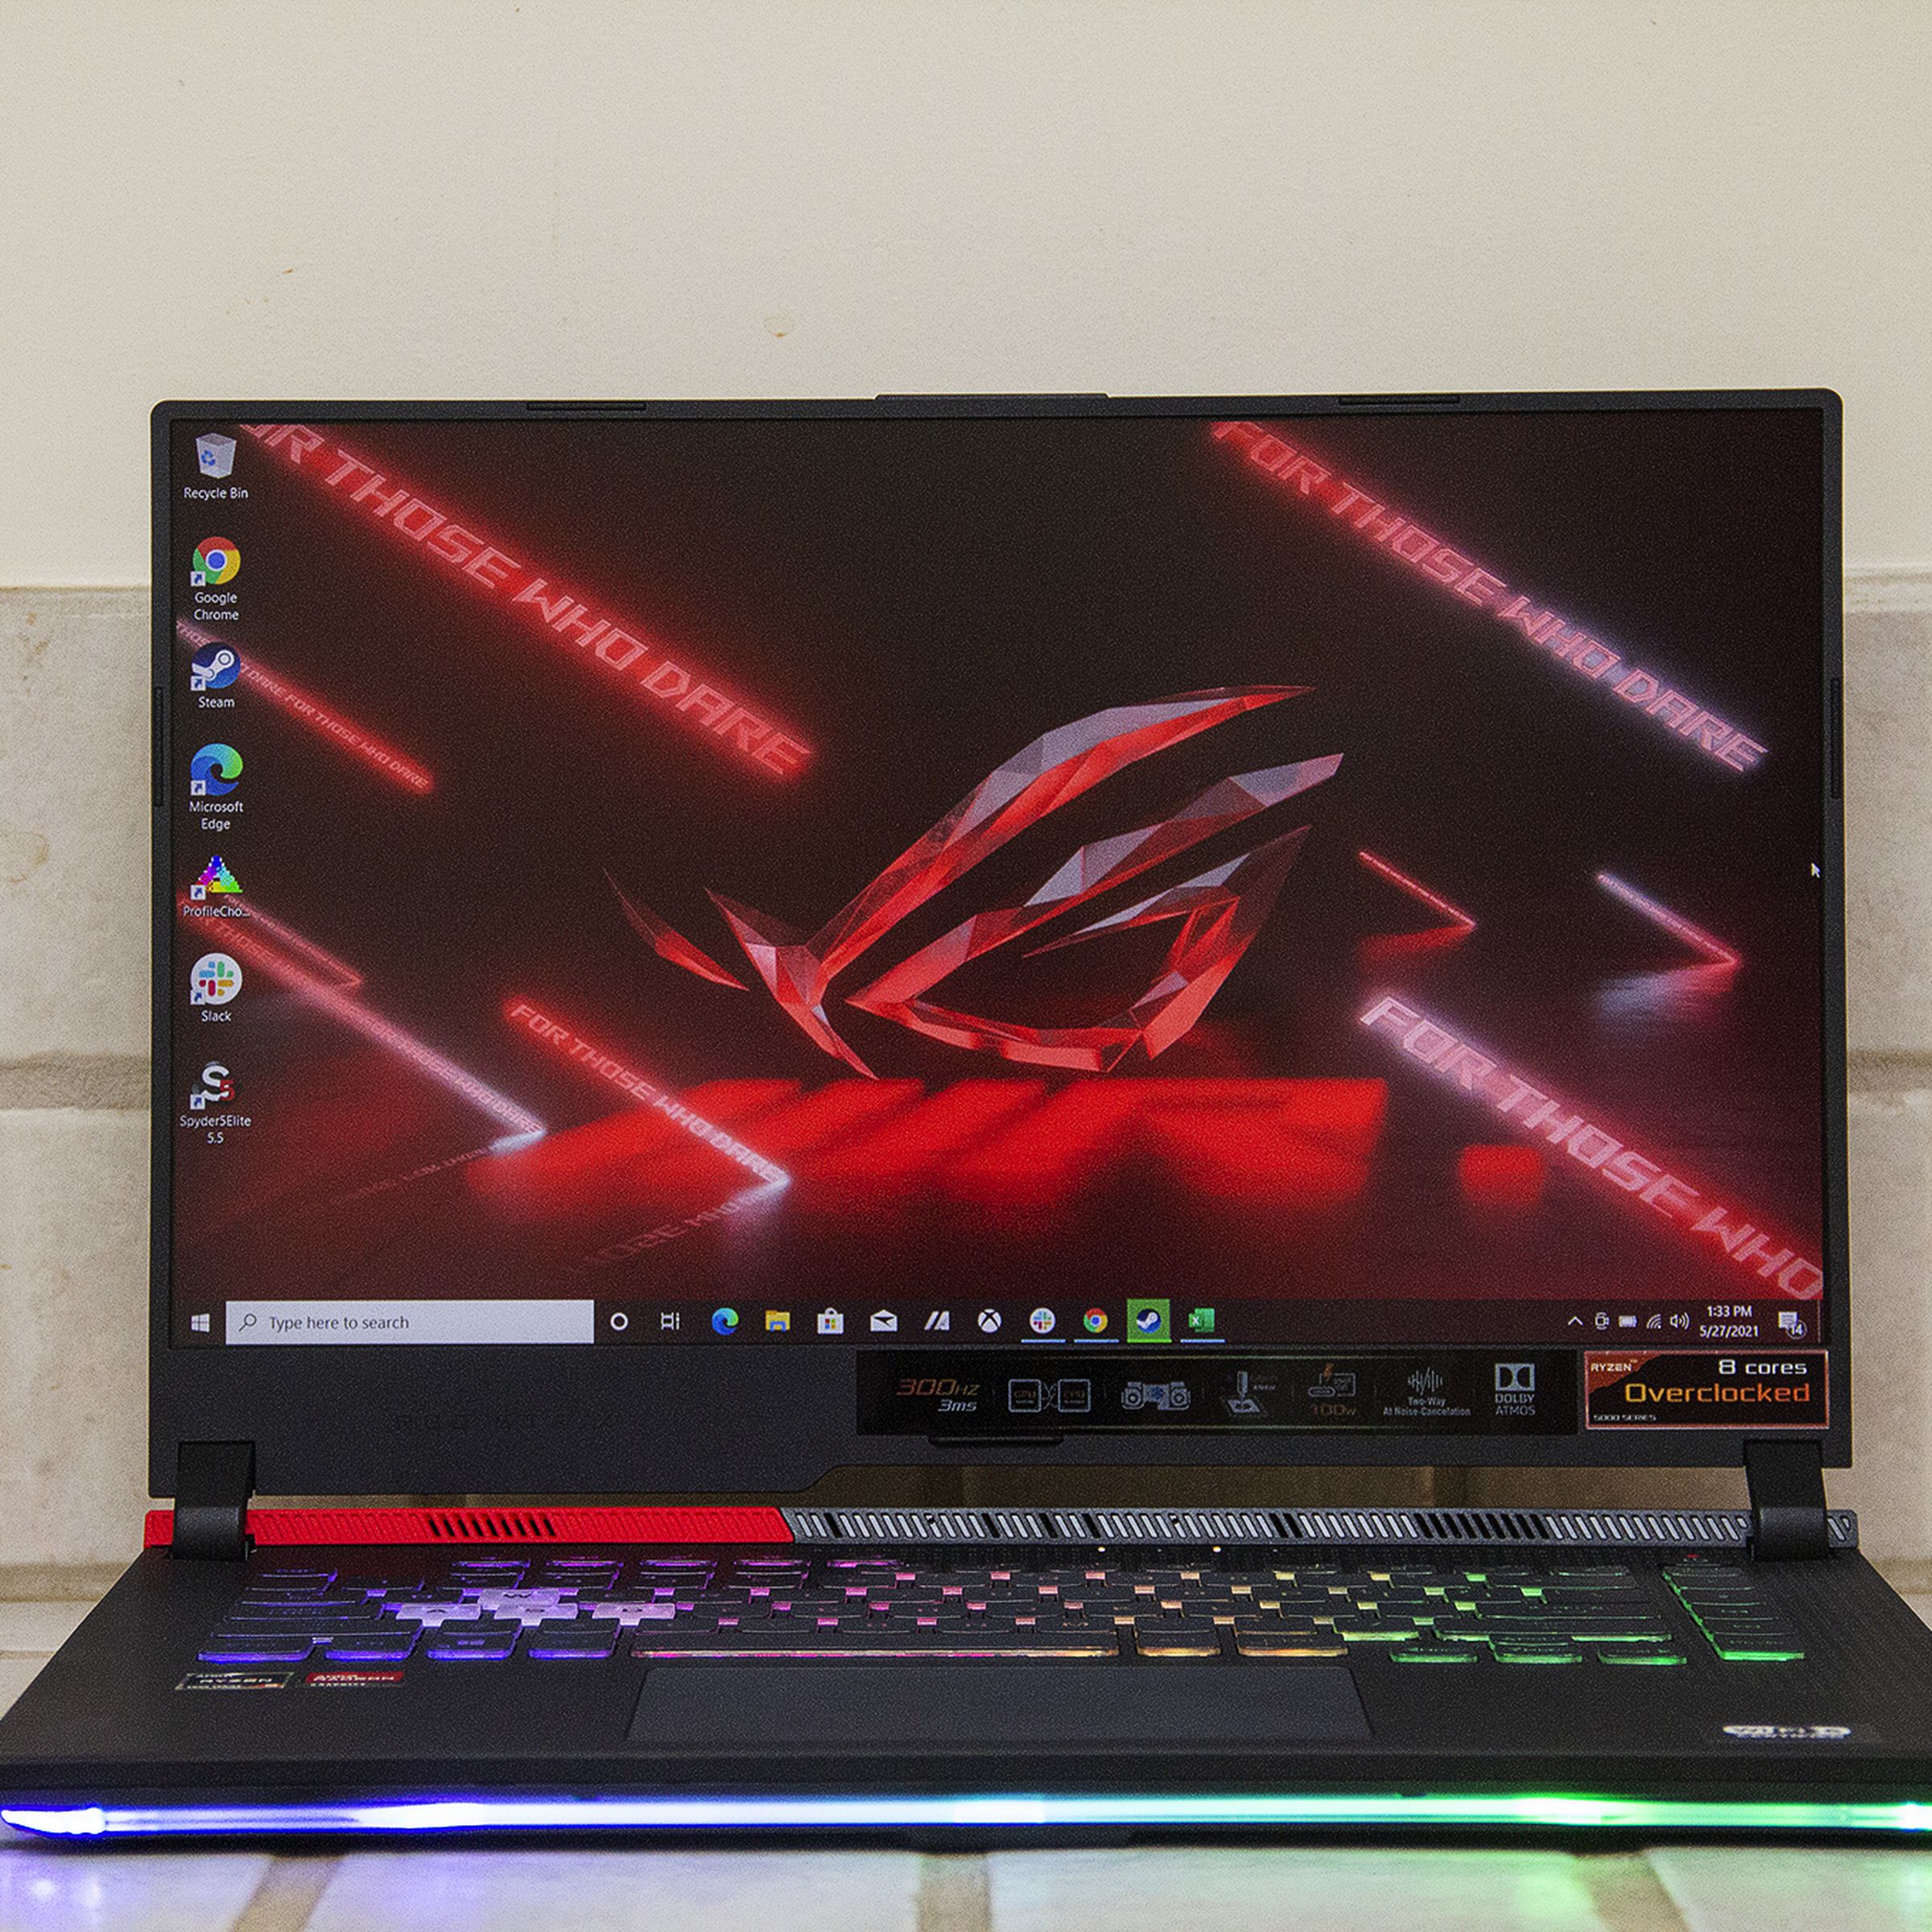 The Asus ROG Strix G15 Advantage Edition seen from teh front, open. The screen displays the ROG logo on a red background.